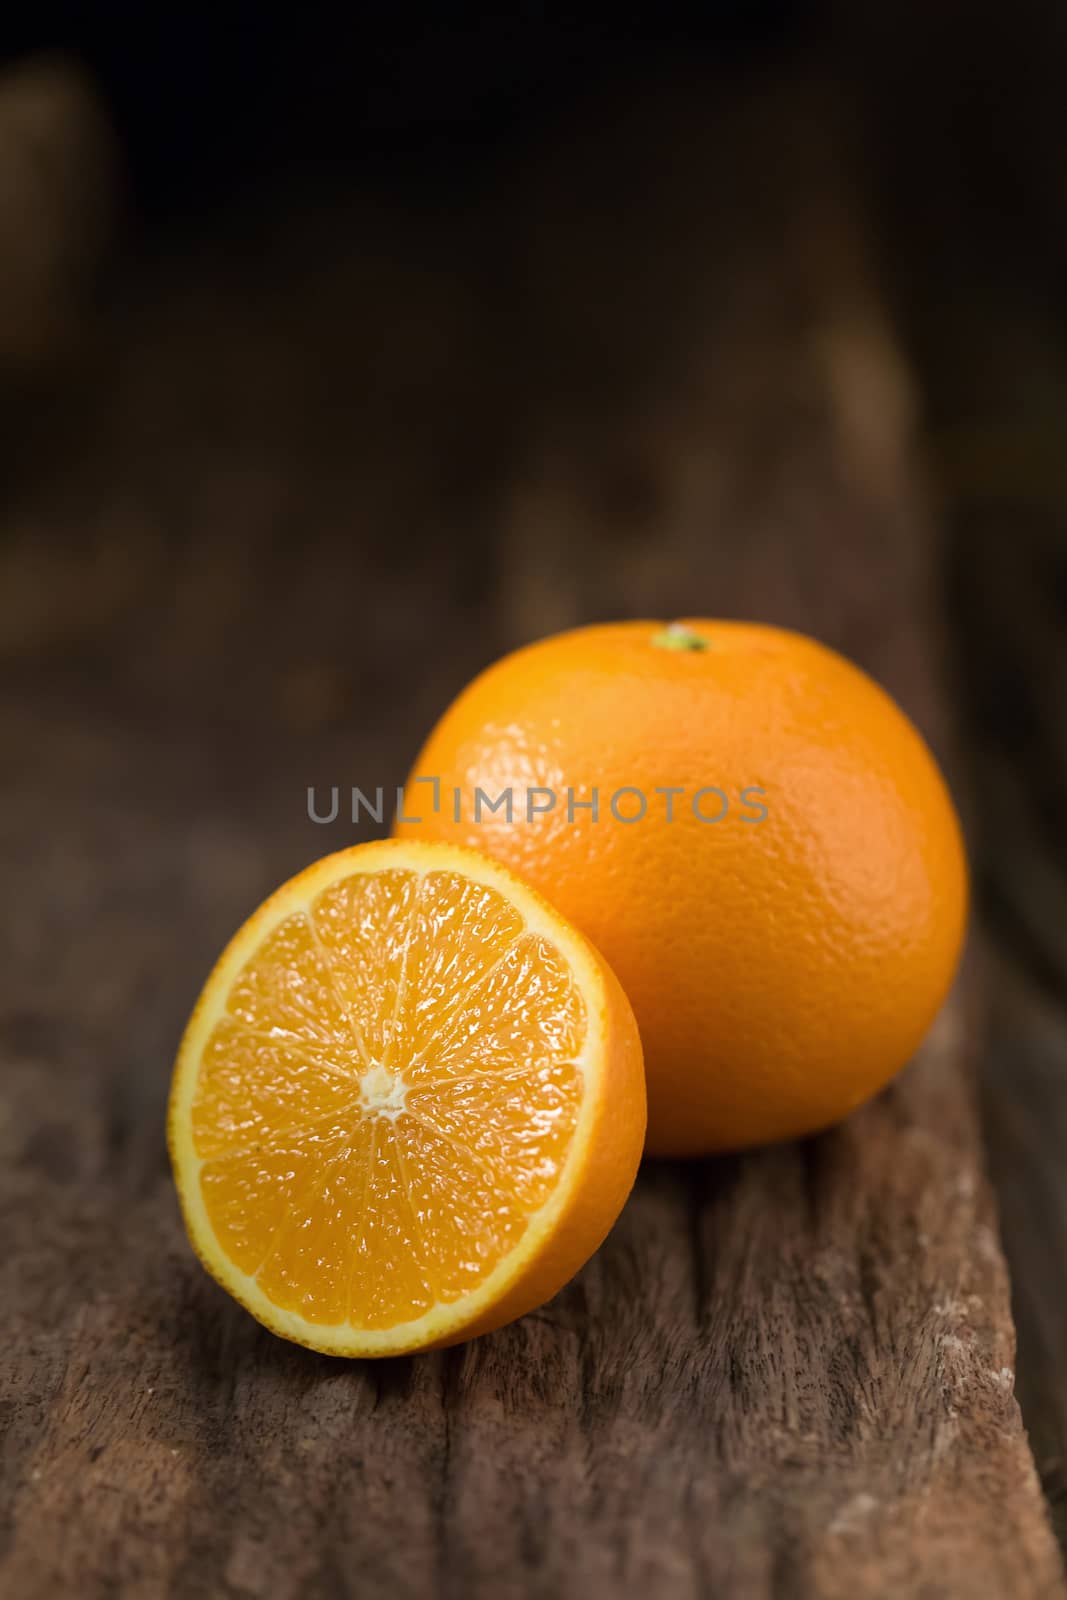 fresh orange and orange slices group on a dark wooden table by kaiskynet